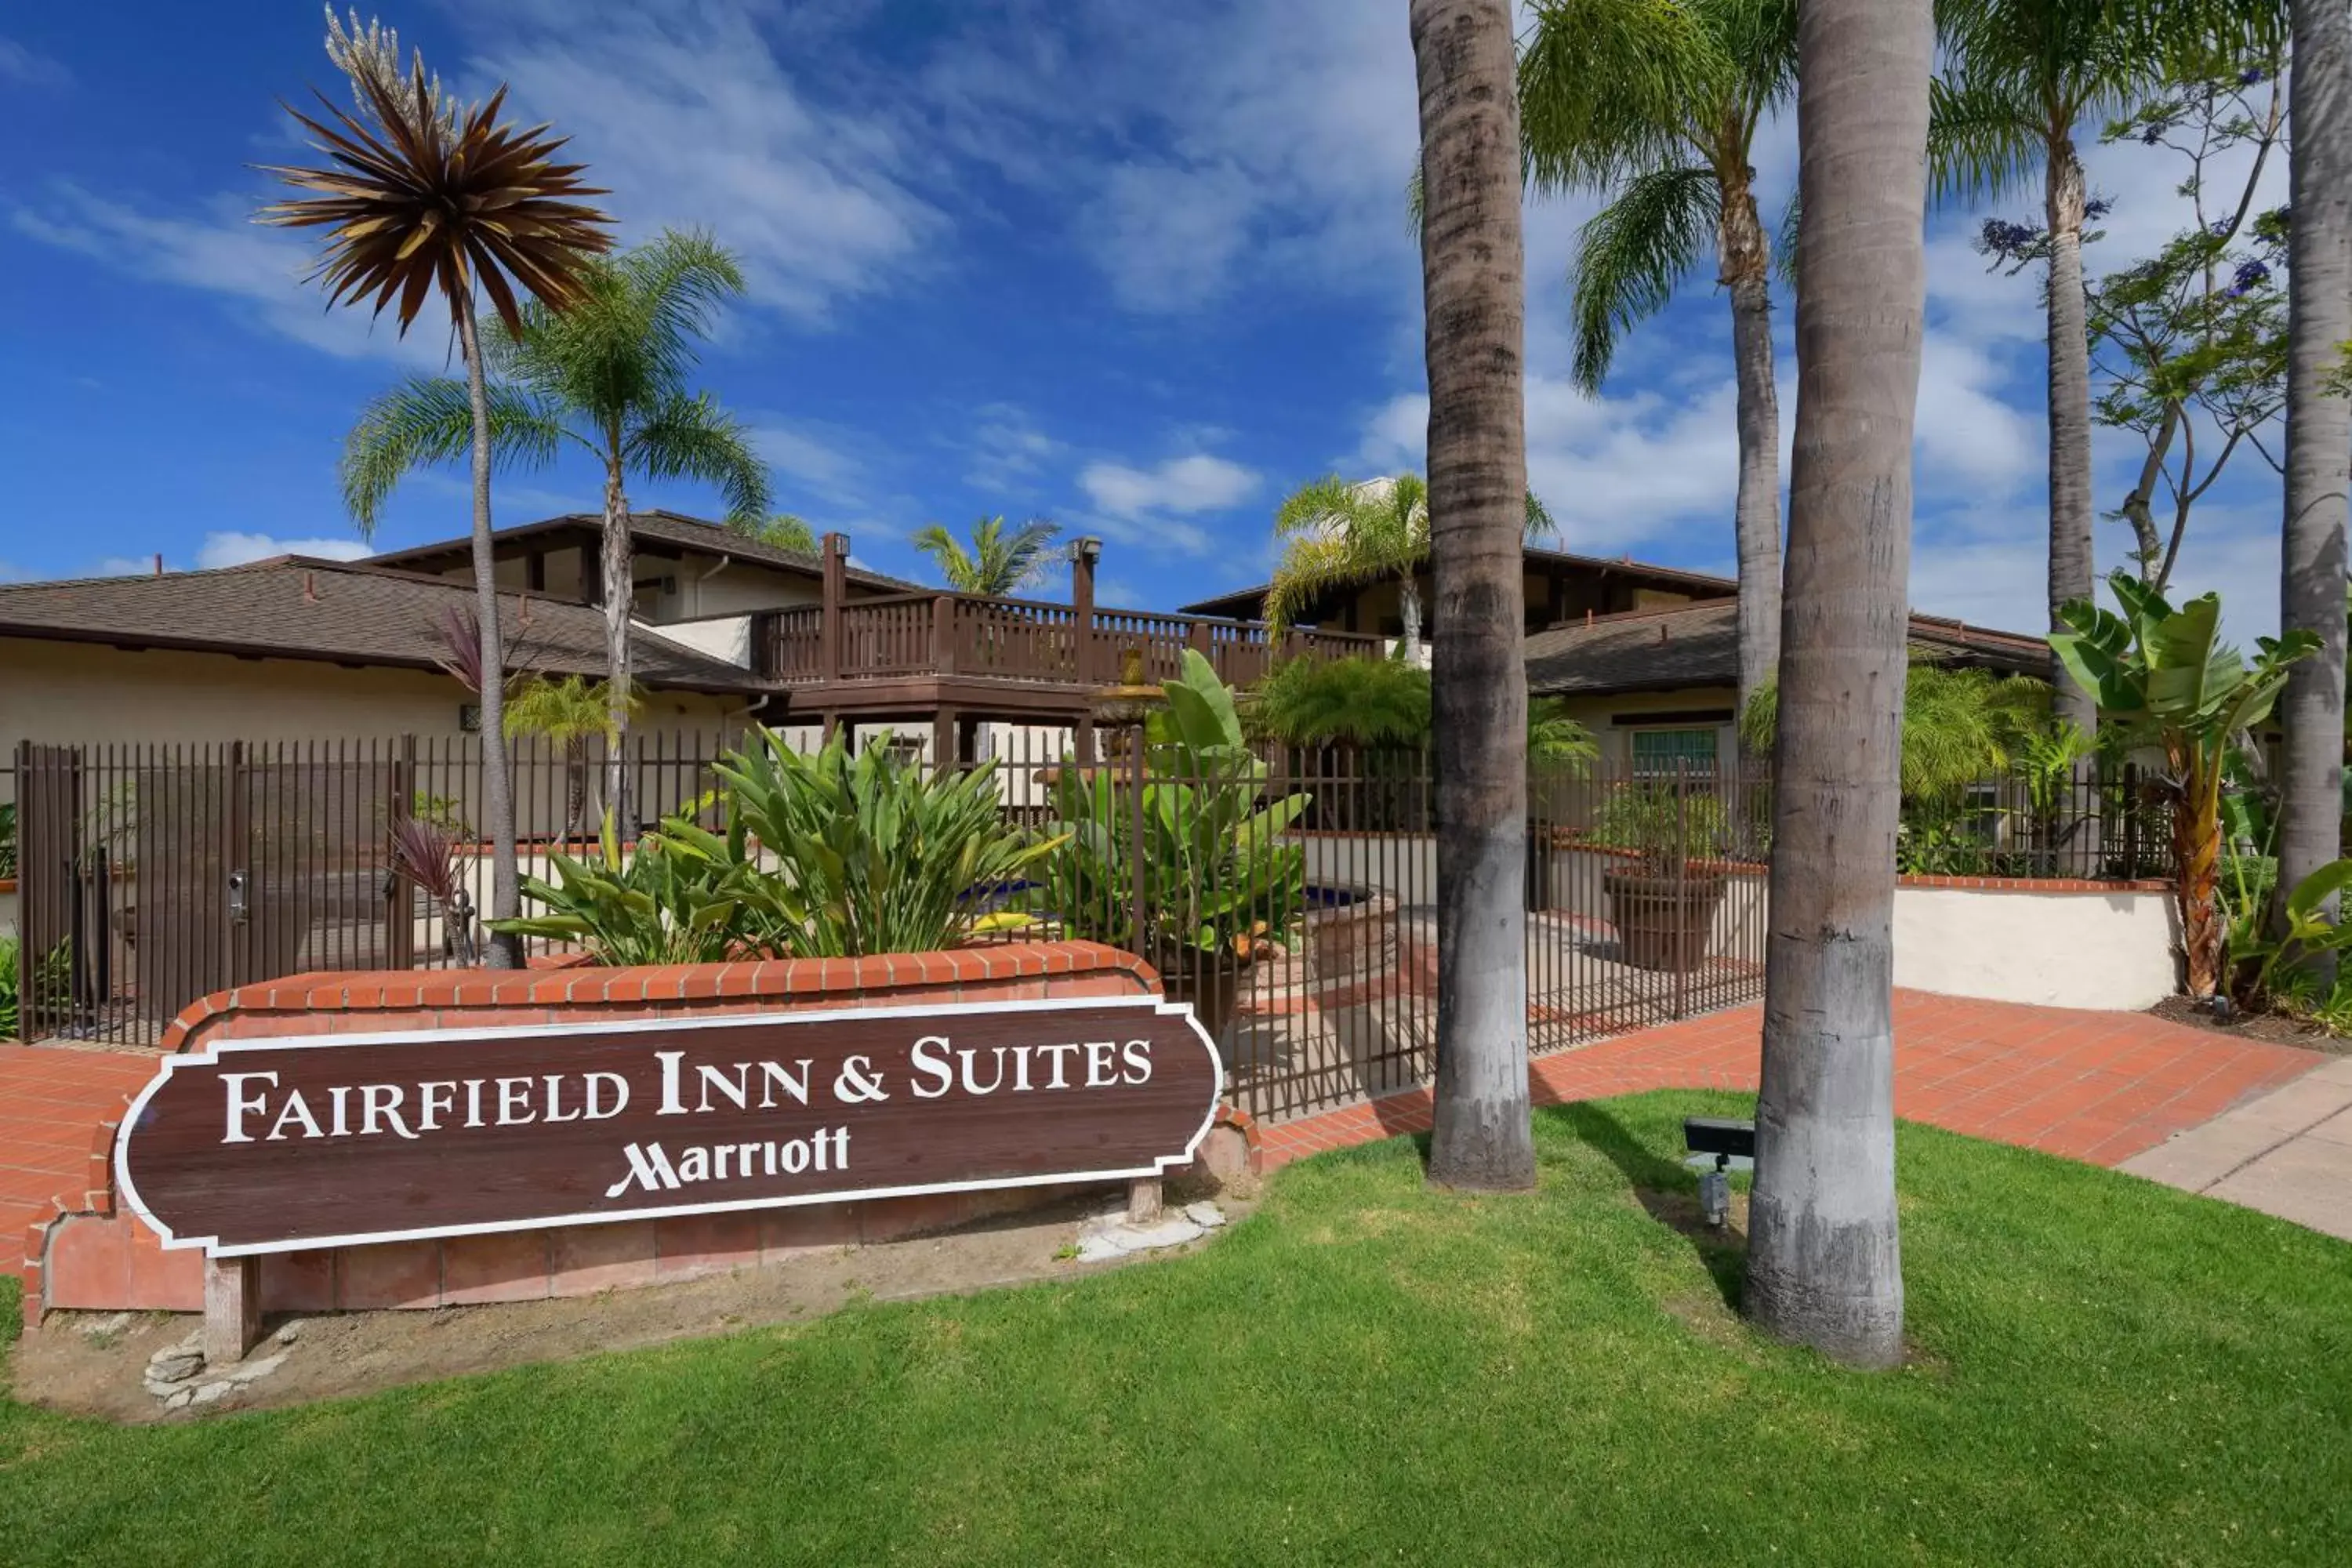 Property Building in Fairfield Inn & Suites San Diego Old Town